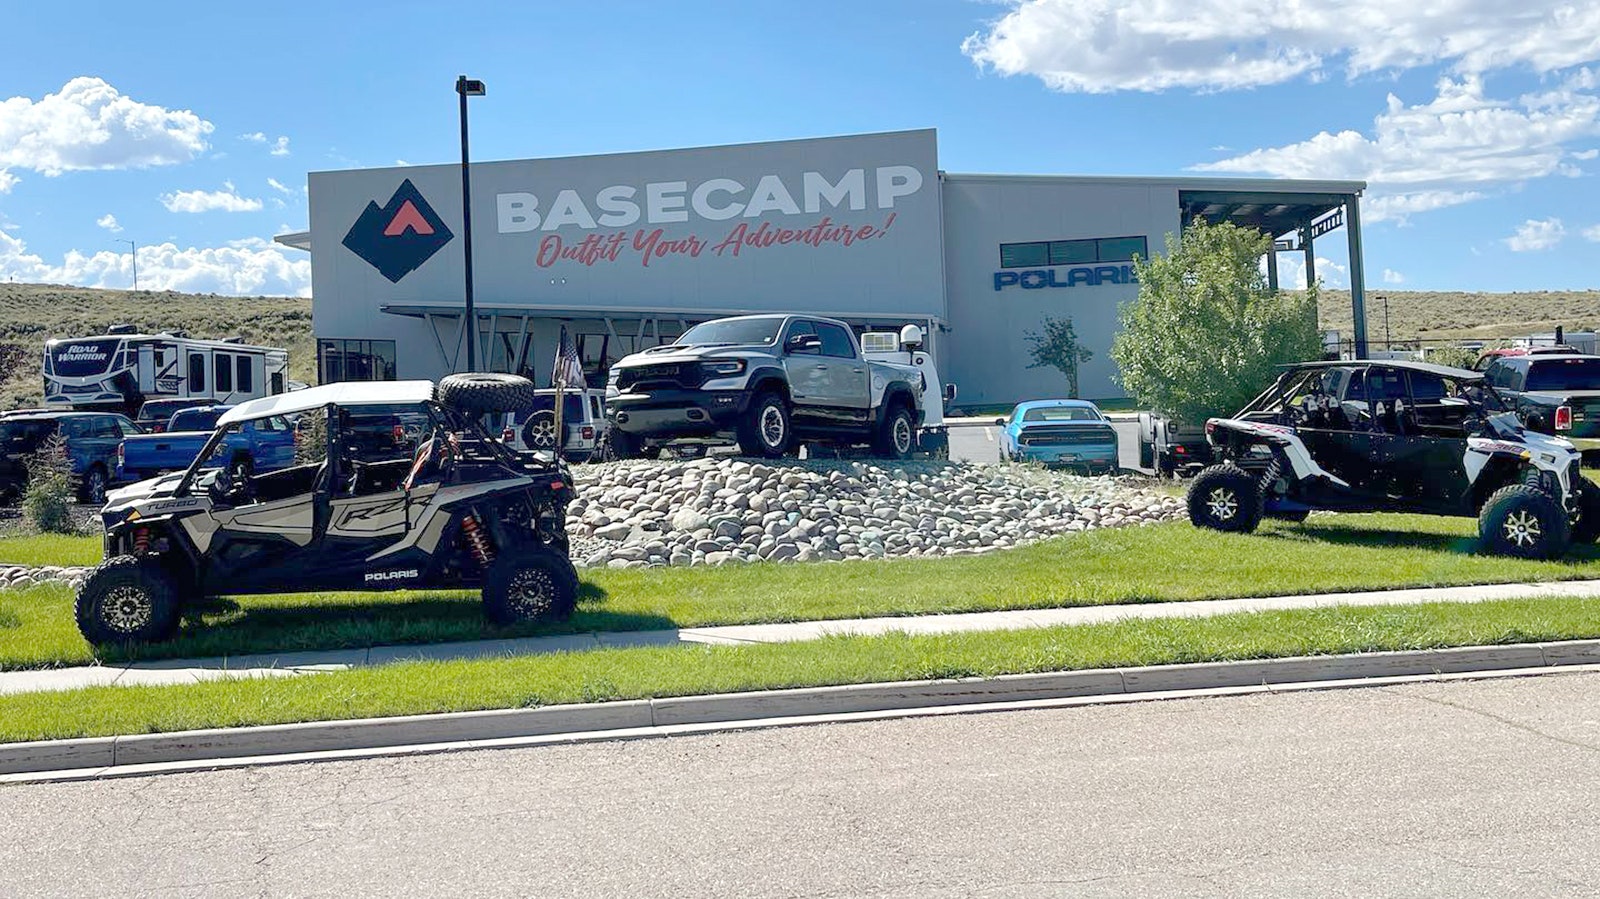 Basecamp Evanston was targeted by a well-organized theft ring, sealing seven high-end UTVs worth more than $225,000.